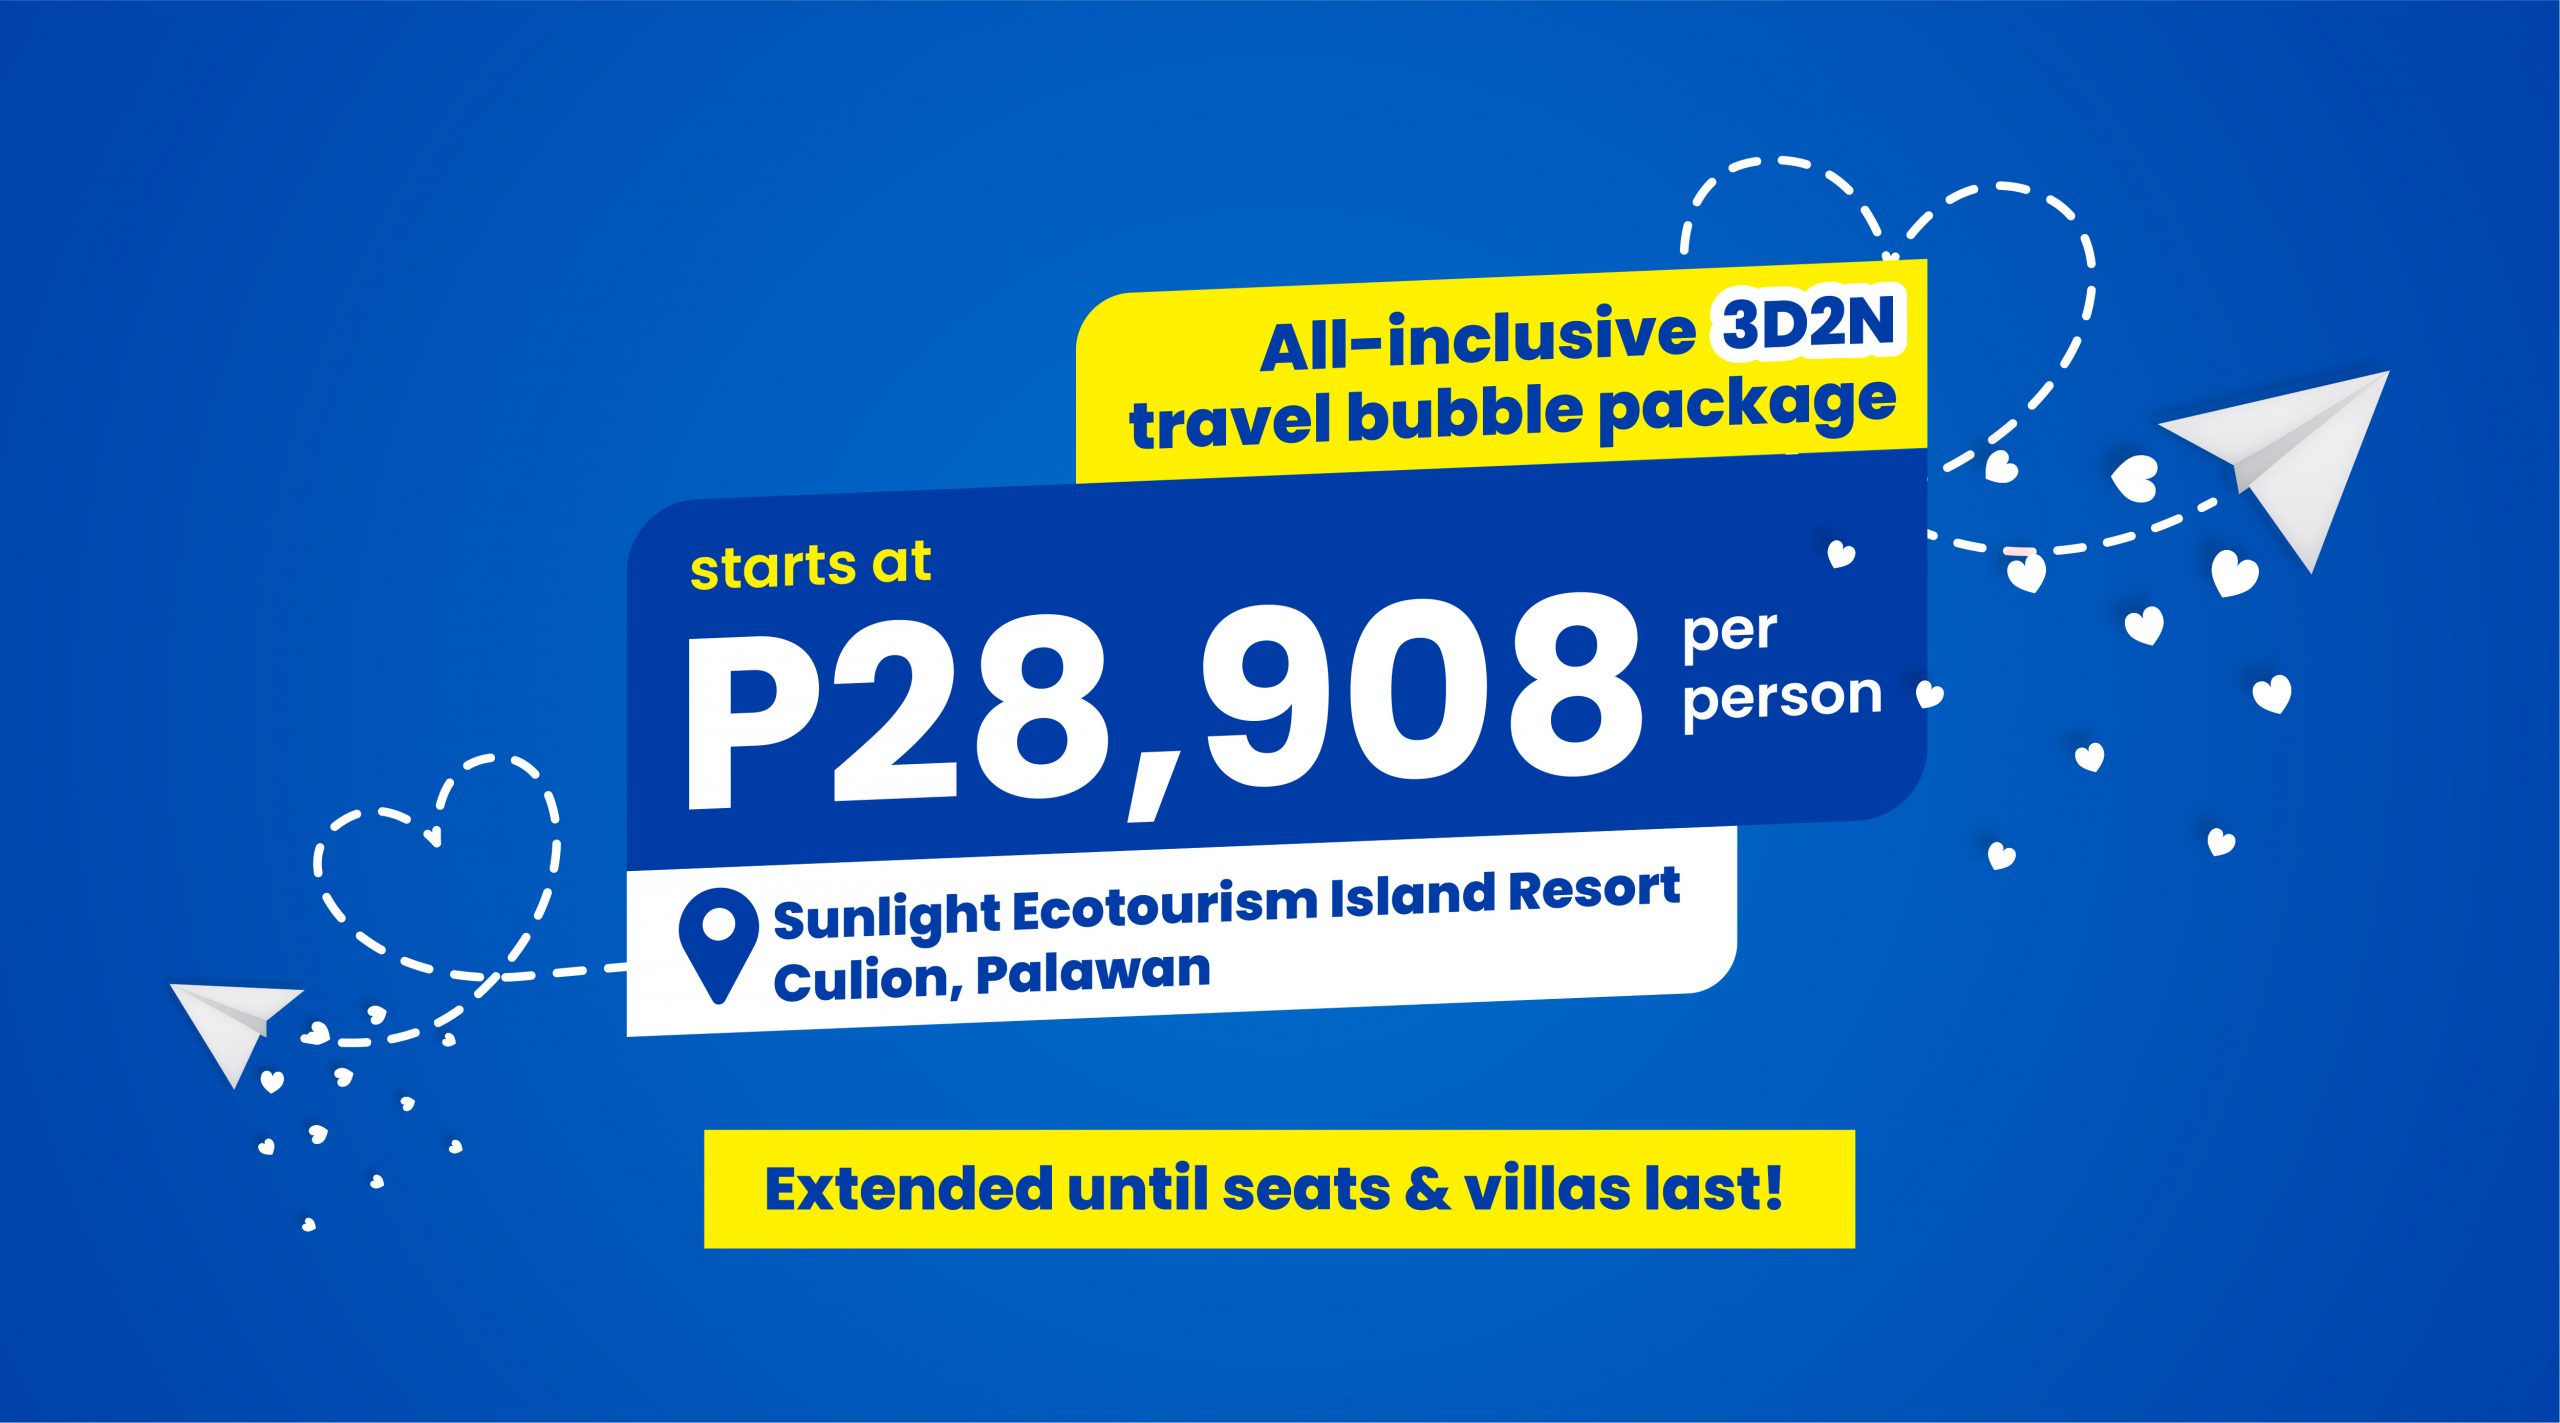 EXTENDED 3D2N All-inclusive Travel Package